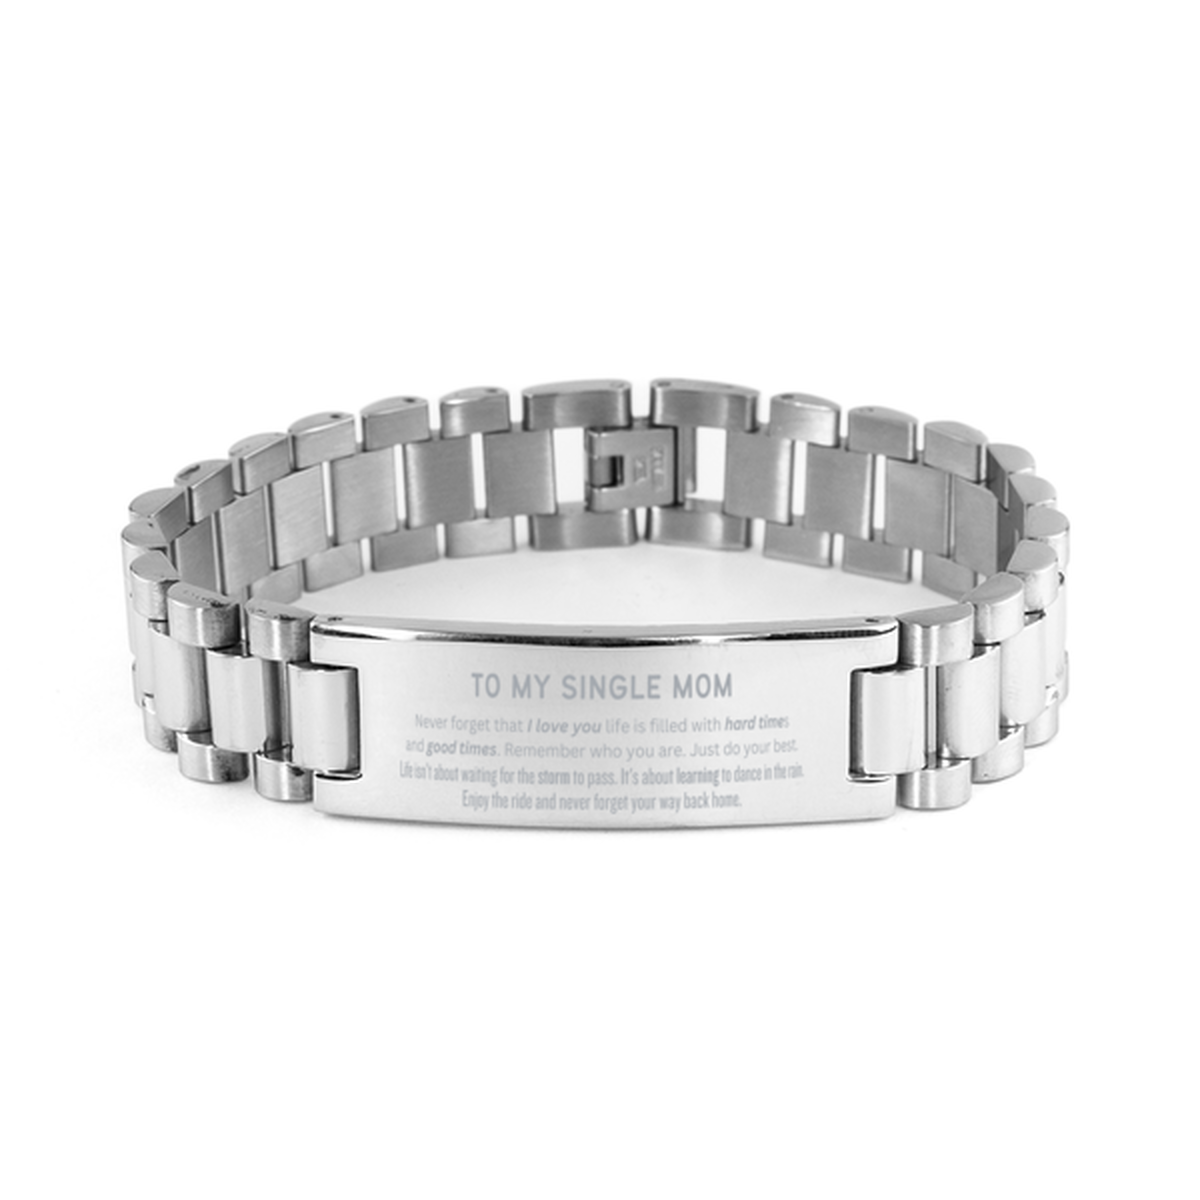 Christmas Single Mom Ladder Stainless Steel Bracelet Gifts, To My Single Mom Birthday Thank You Gifts For Single Mom, Graduation Unique Gifts For Single Mom To My Single Mom Never forget that I love you life is filled with hard times and good times. Remem